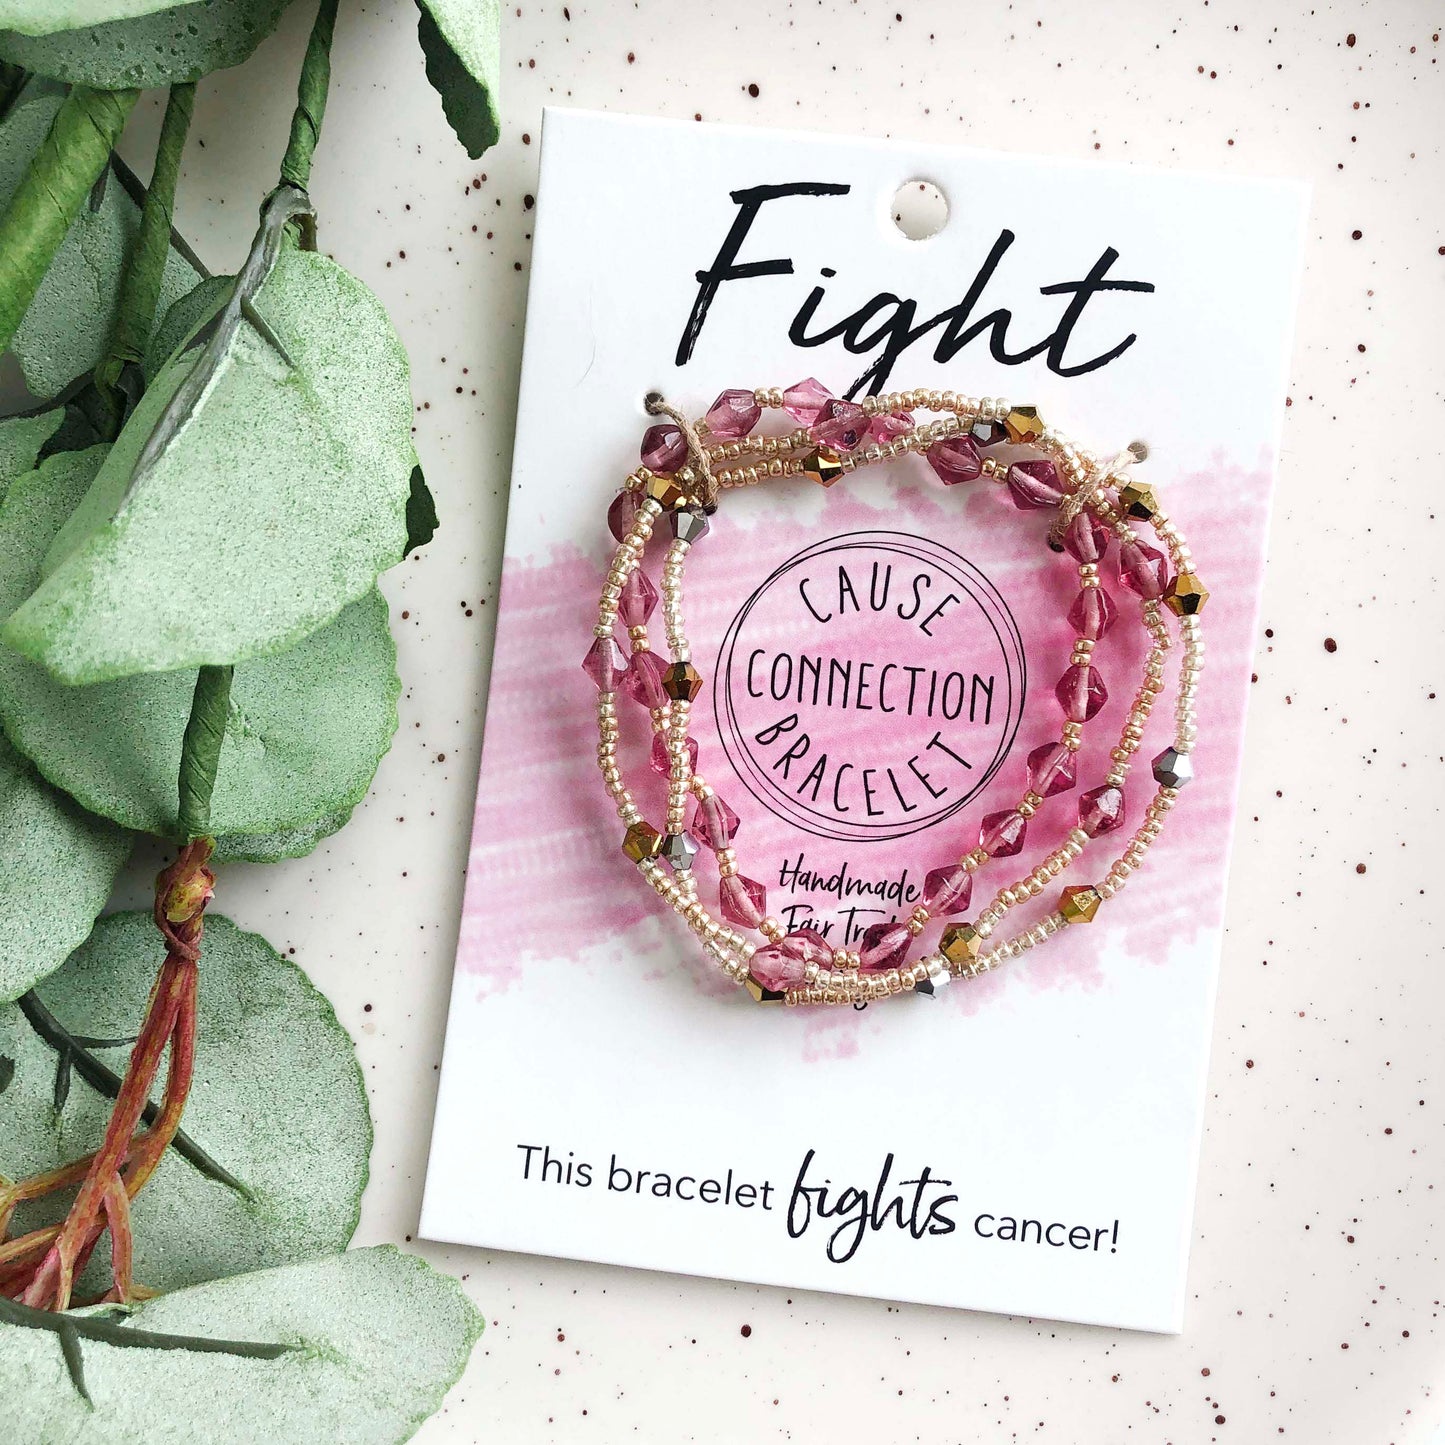 Image of the Cause Connection Bracelet, in the Fight theme.